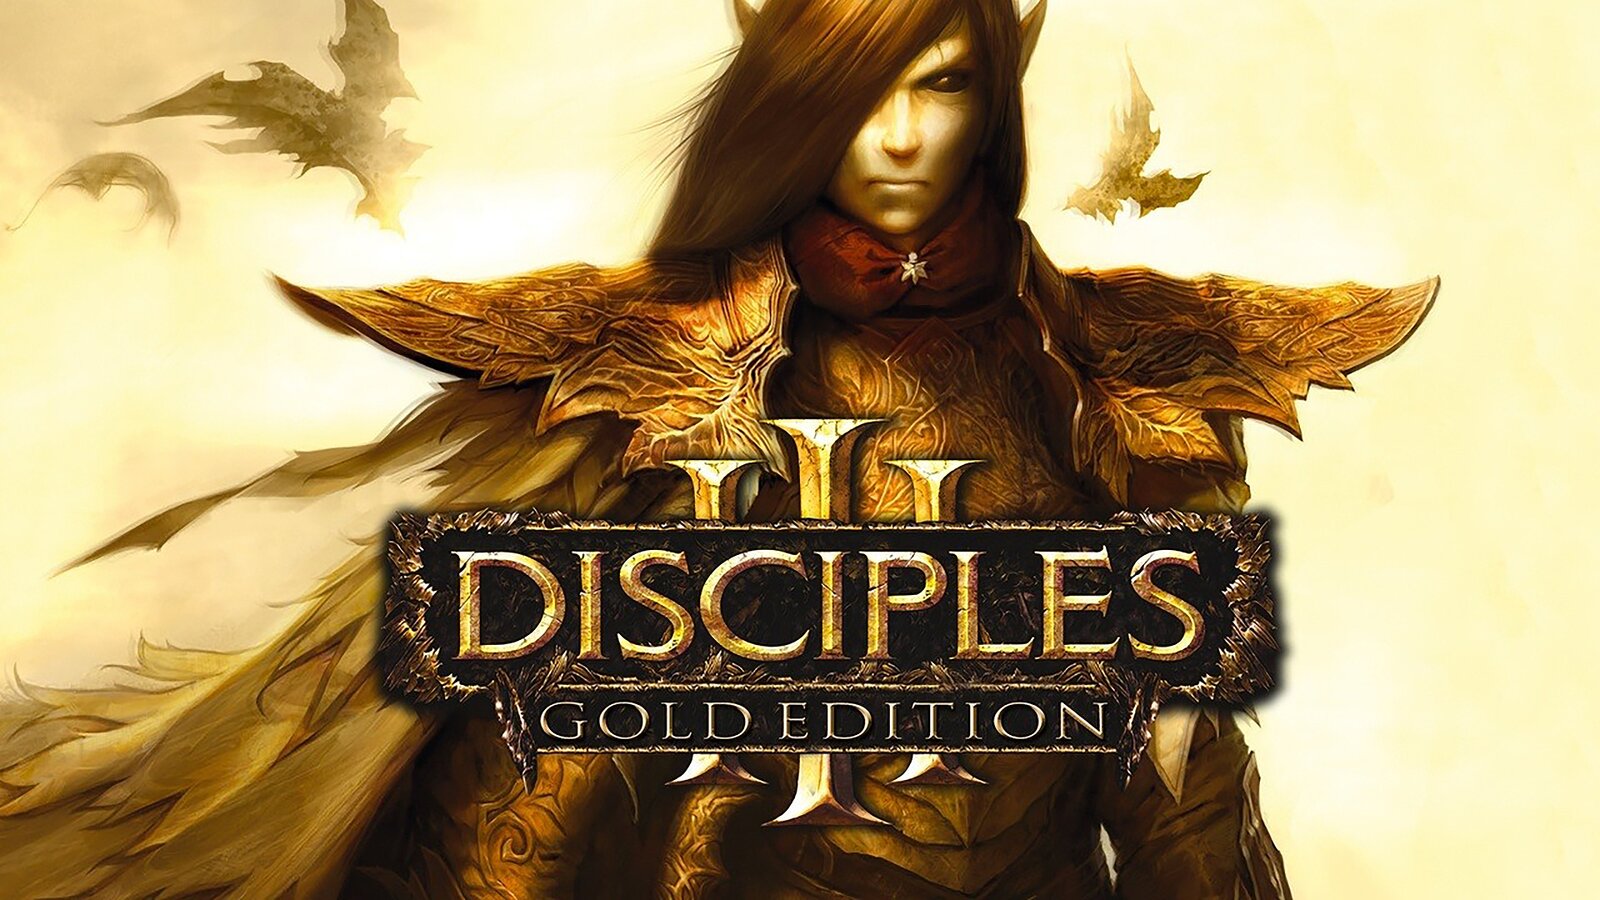 Disciples III - Gold Edition